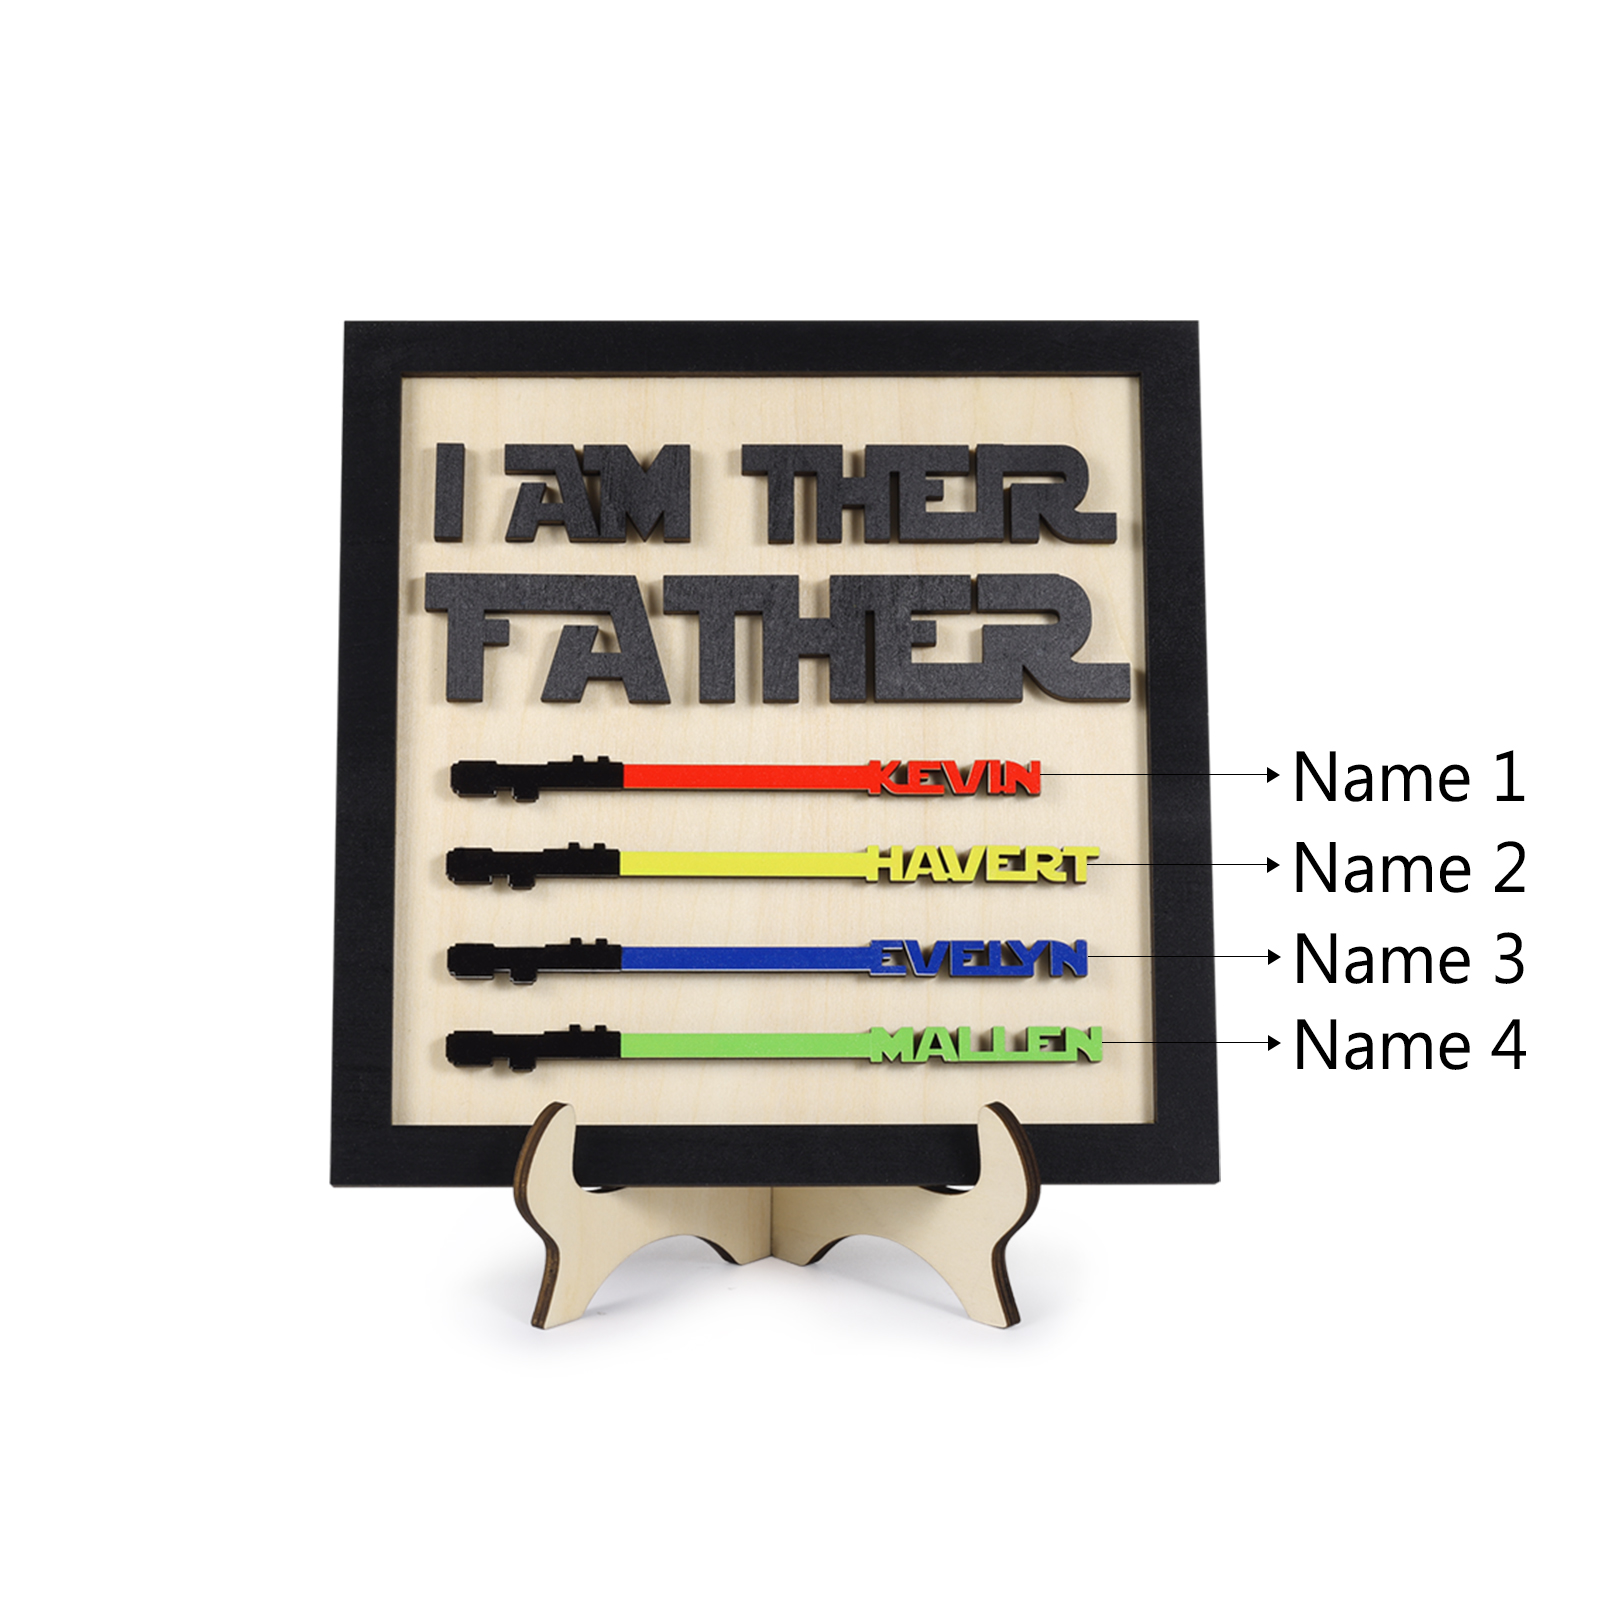 Personalized Star Wars Sign Father's Day Gifts - I AM THEIR FATHER - Wood Sign with 4 Names